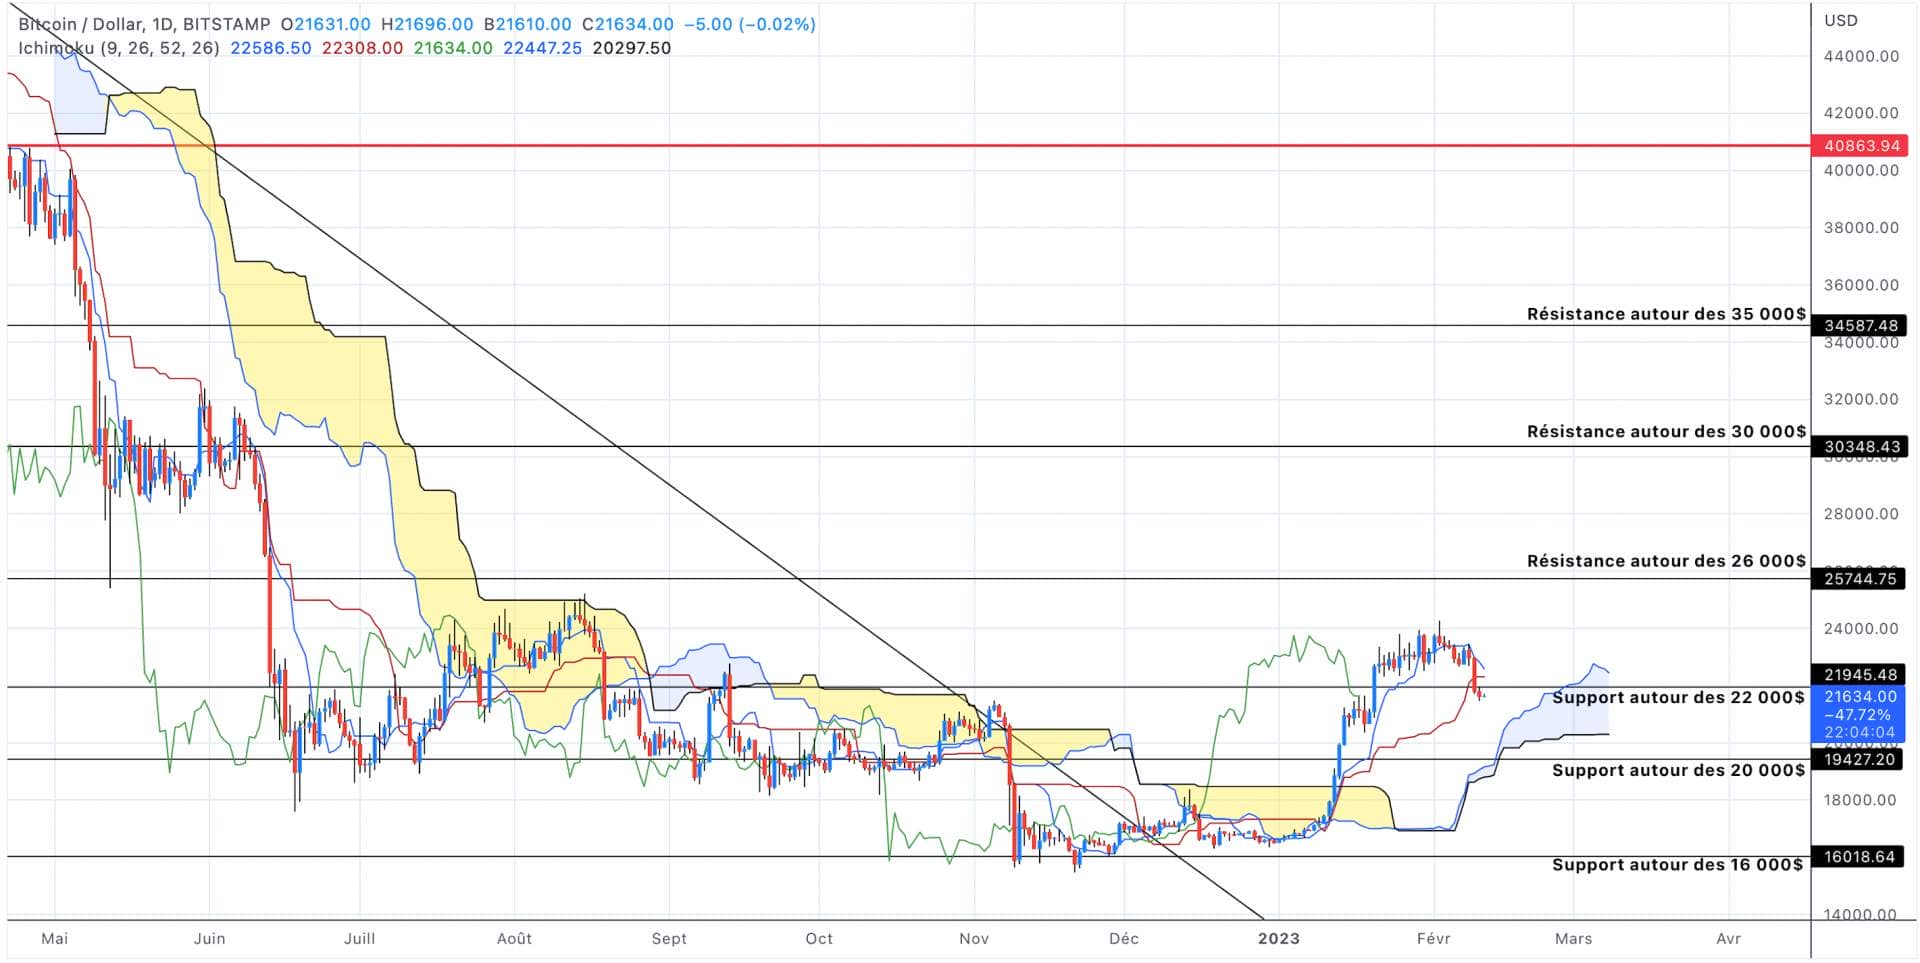 Bitcoin price analysis in daily units - February 11, 2023